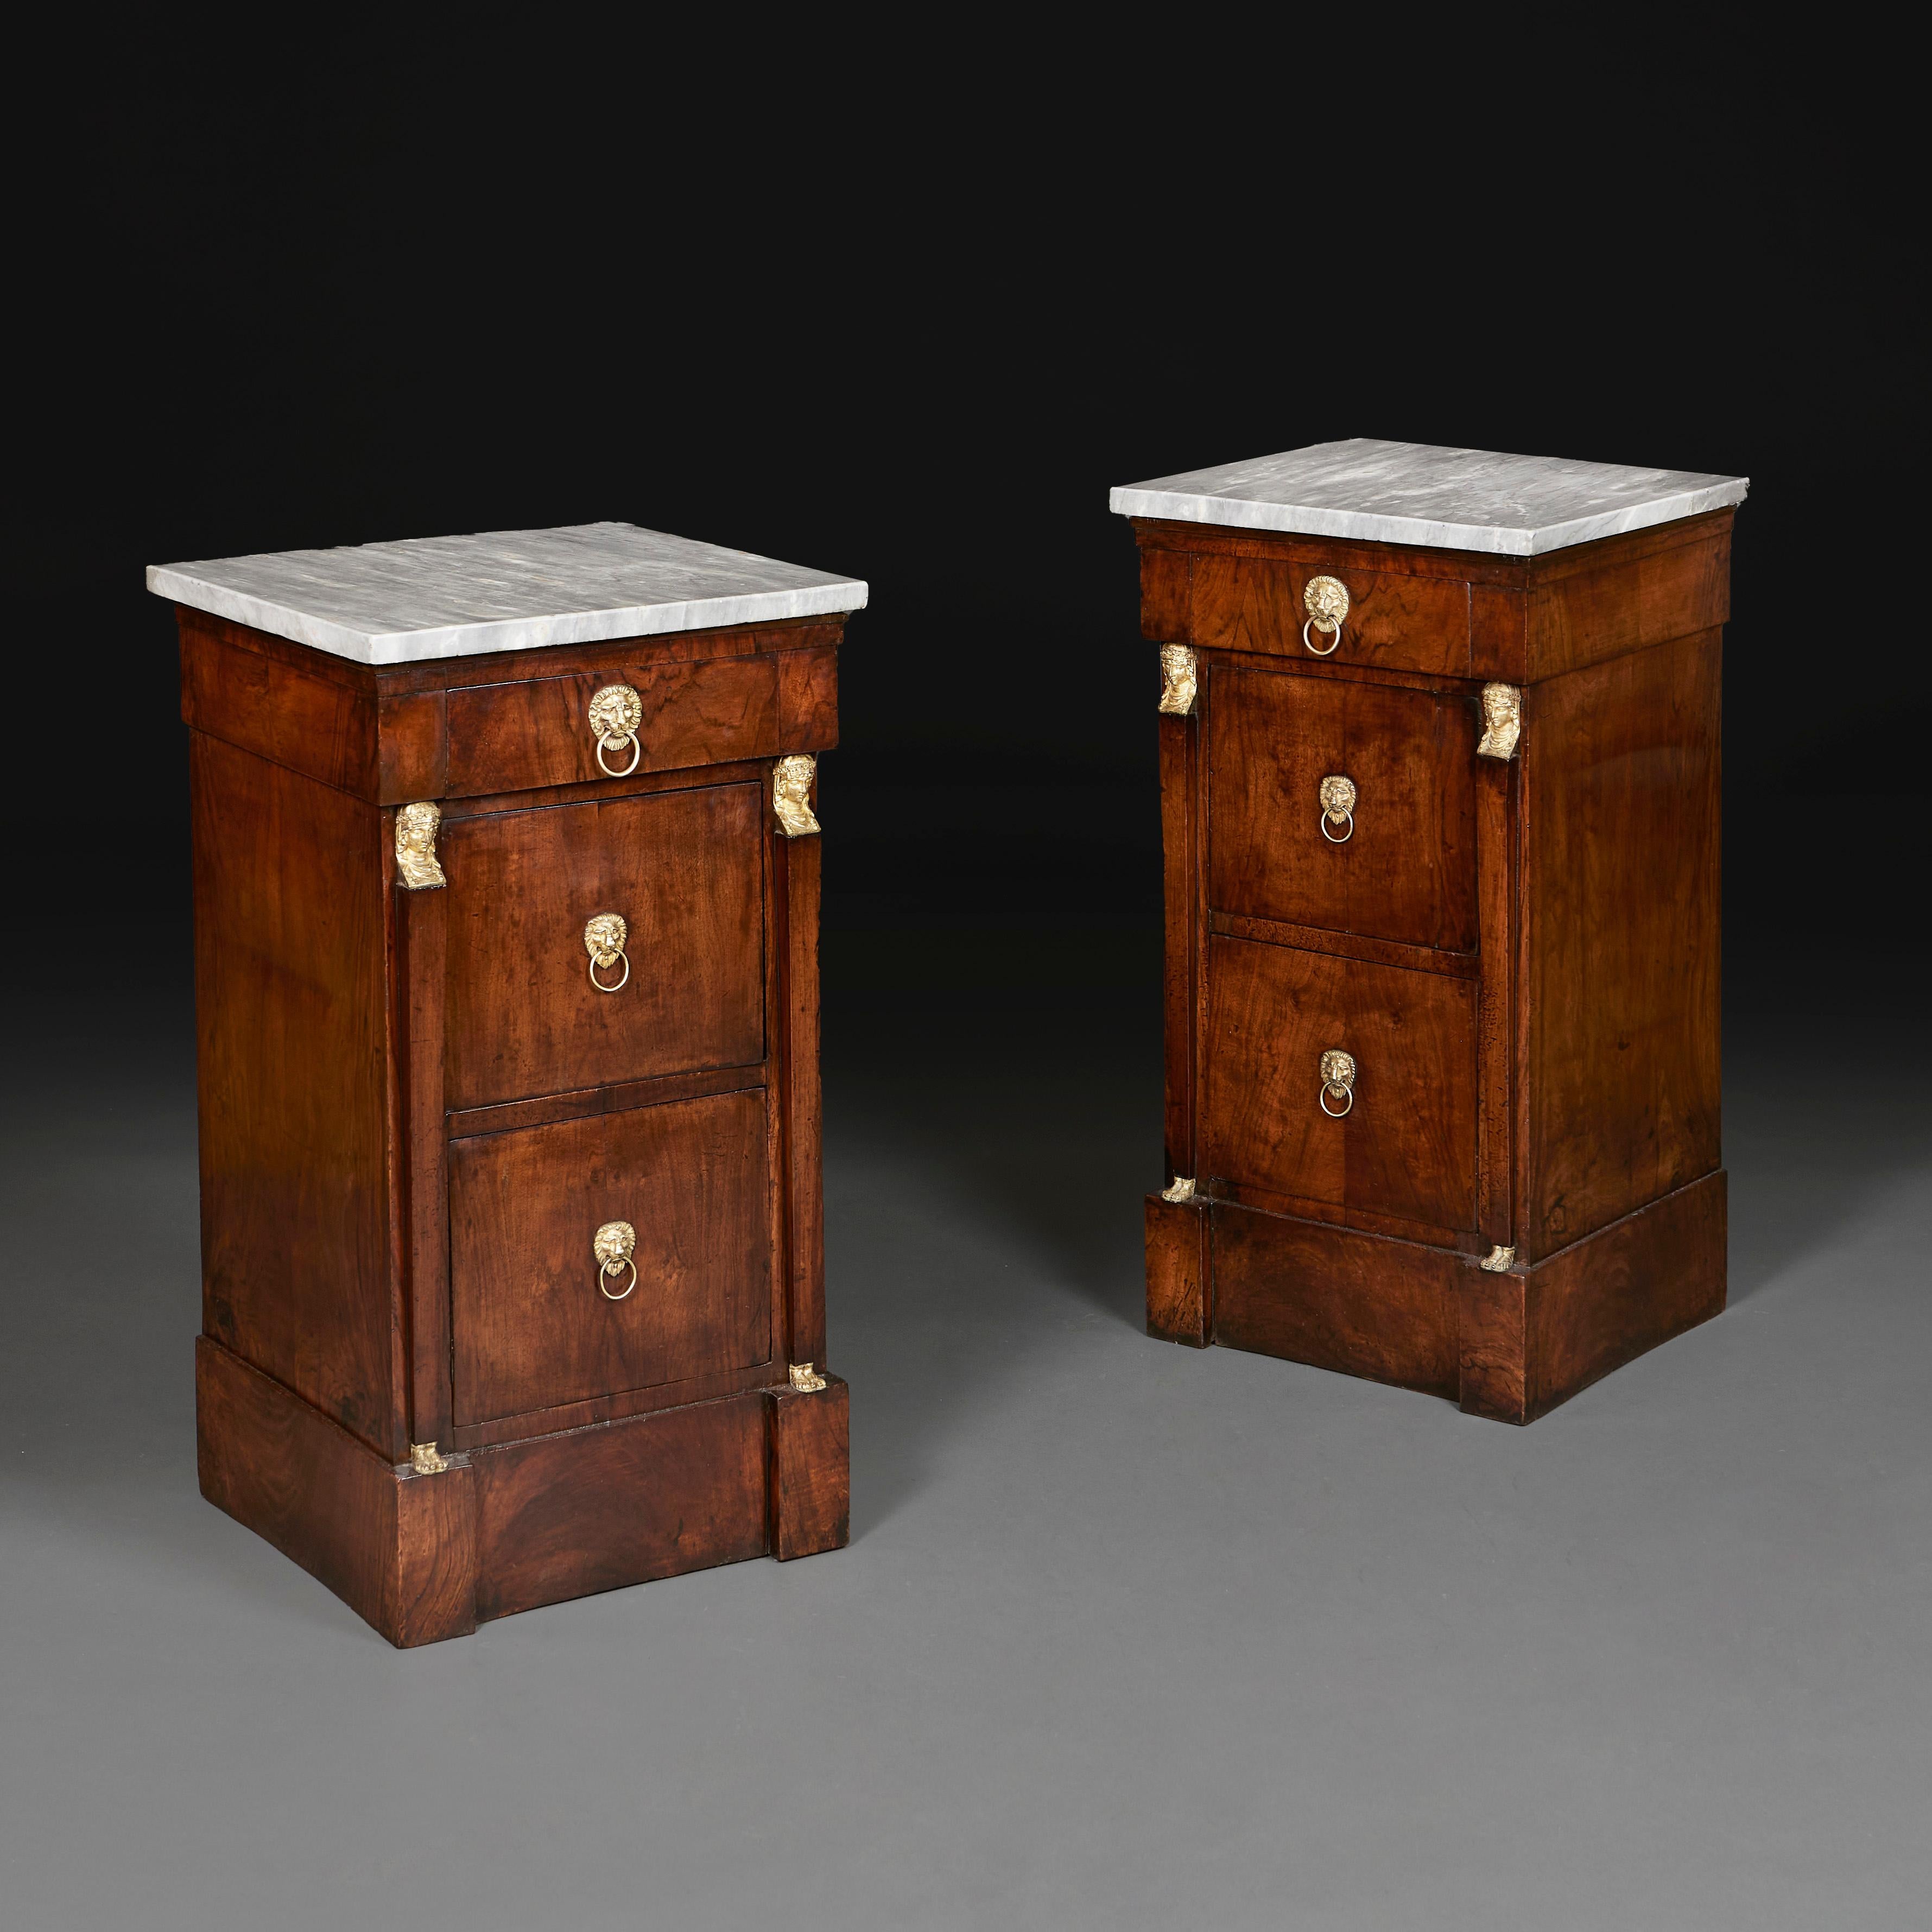 France, circa 1860

A pair of mid nineteenth century Empire bedside cabinets, with original grey marble tops, with ormolu Egyptian caryatids, opening with two drawers and one cupboard door to the front, with ormolu lion mask handles. 

Height